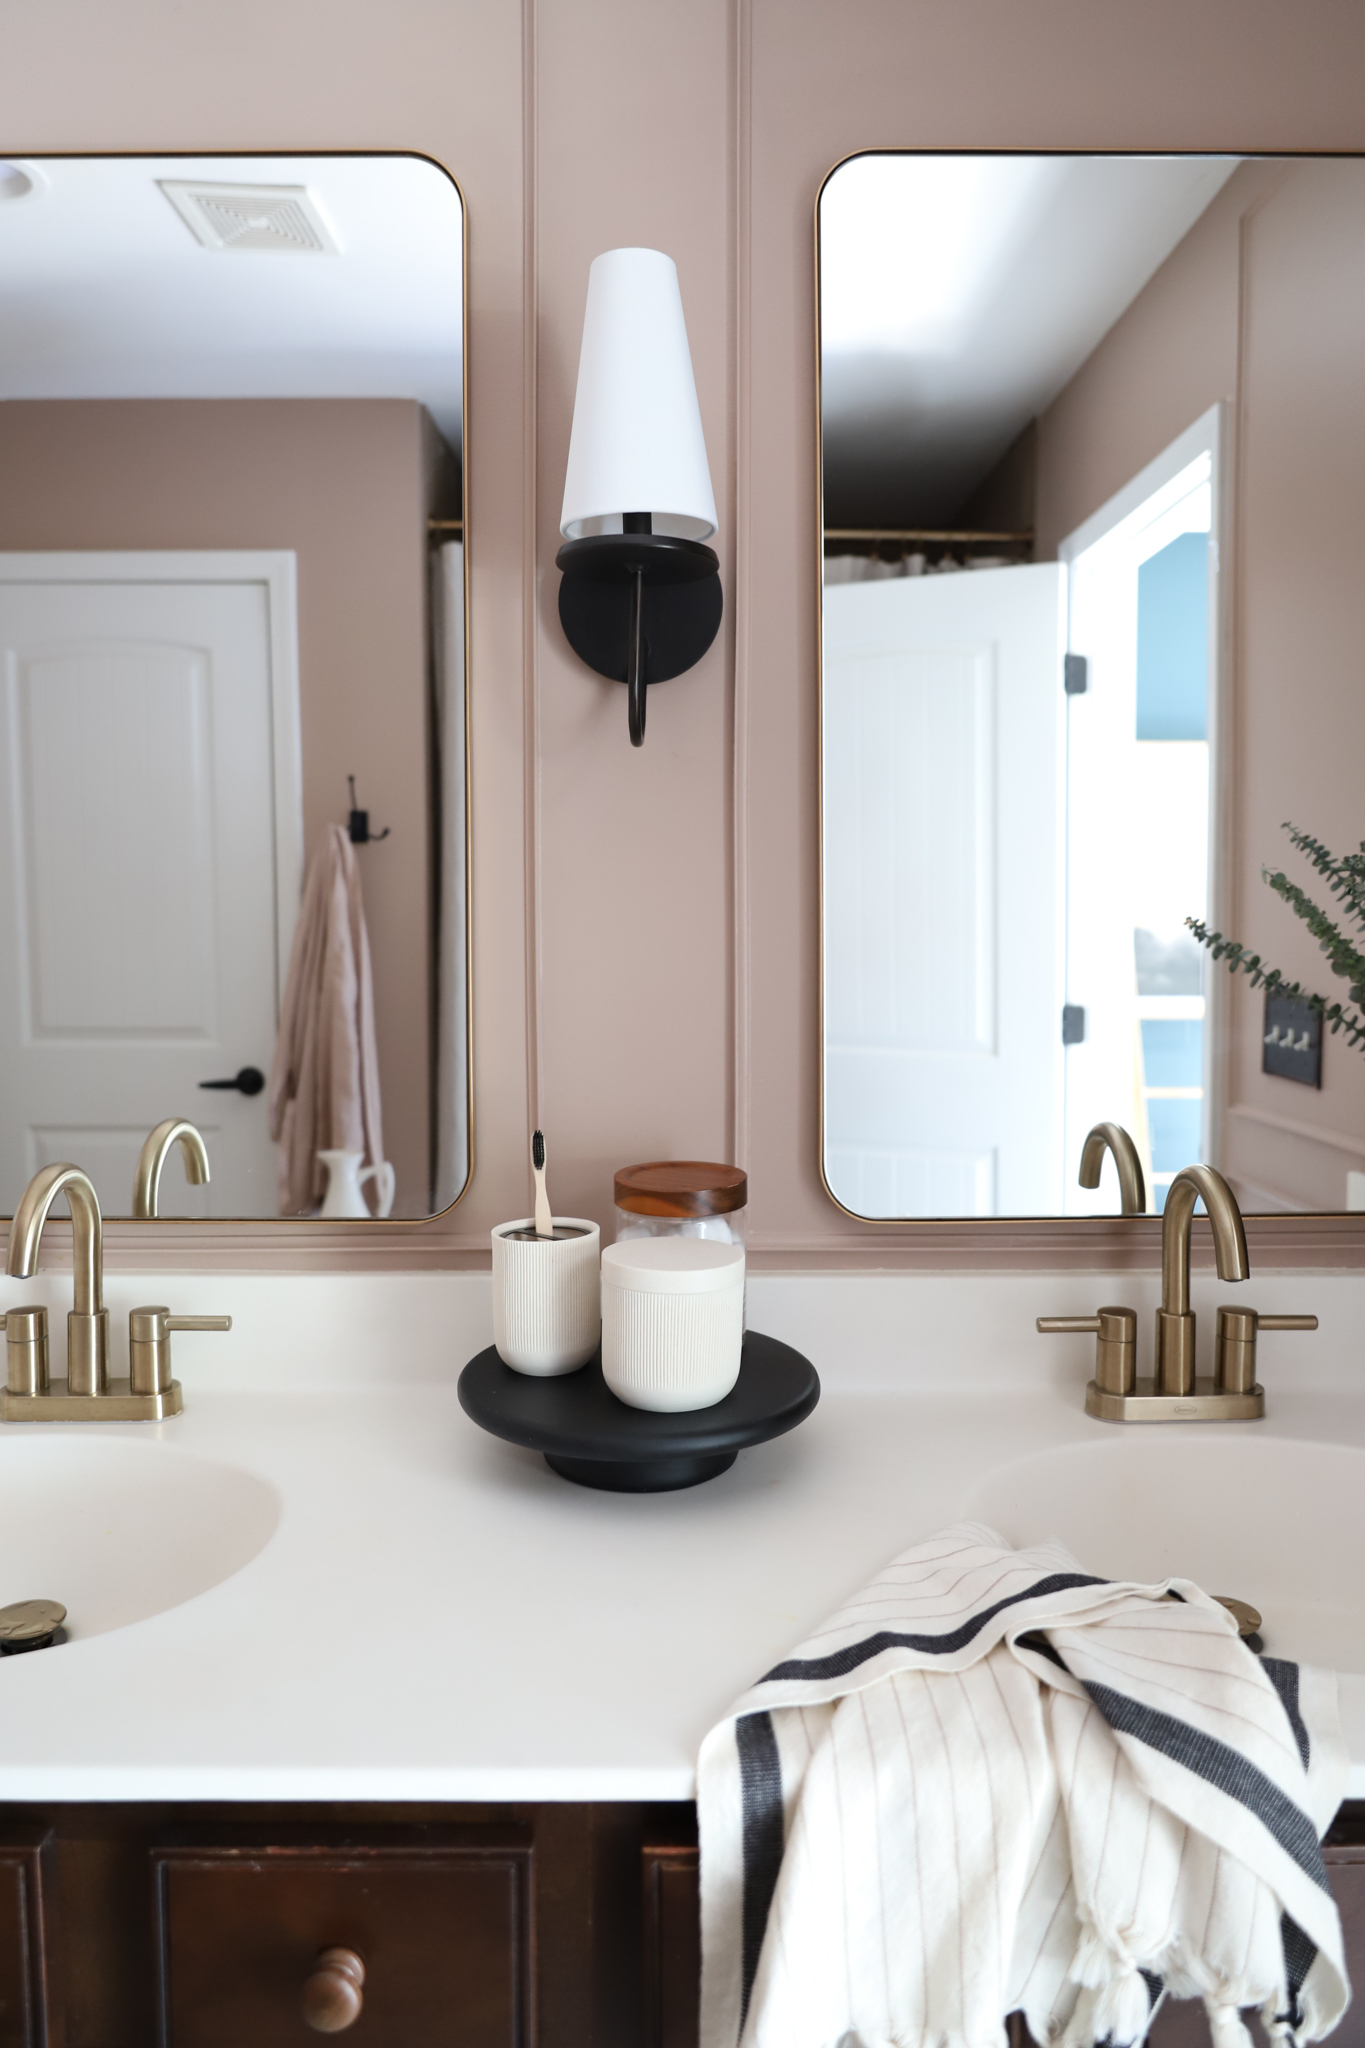 Do These 6 Things to Level Up Your Basic Builder Bathroom - Pretty Real